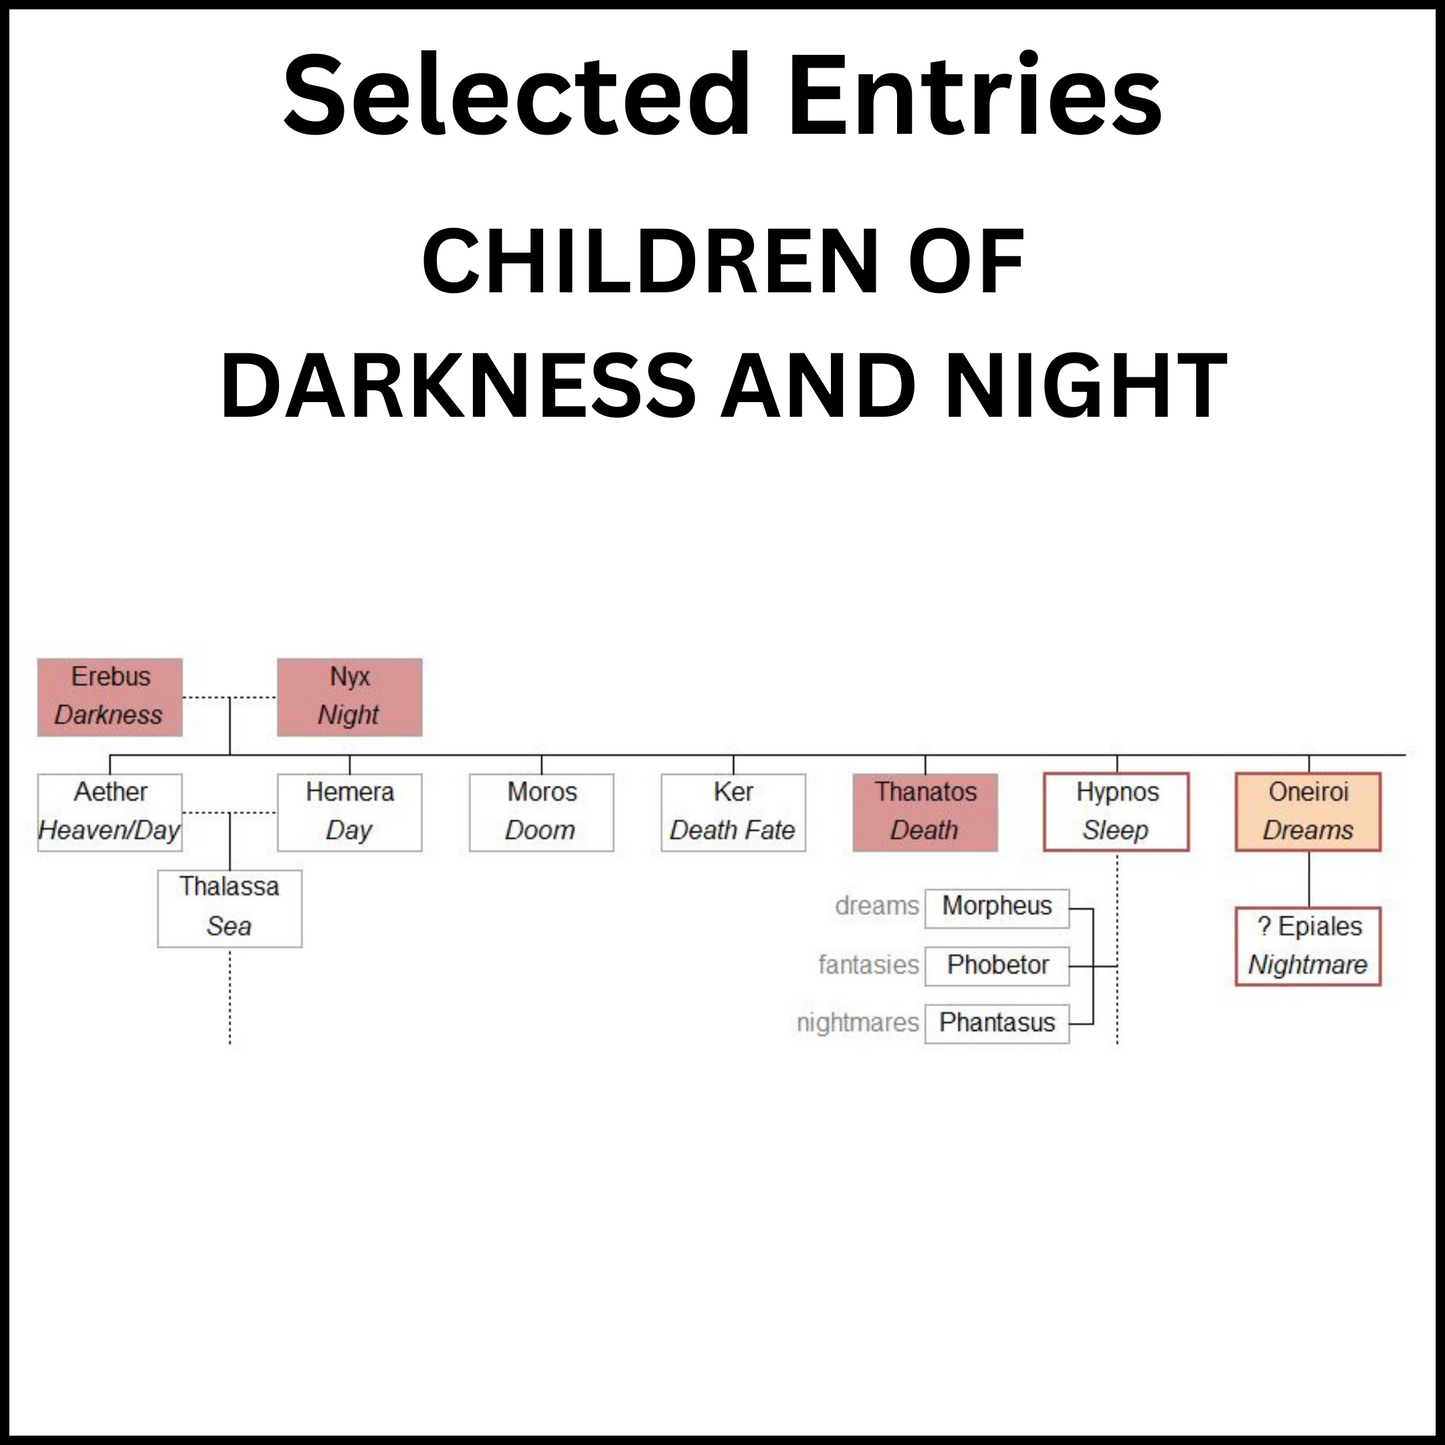 Example of a section of the Family Tree of the Greek Gods showing the children of Darkness and Night.